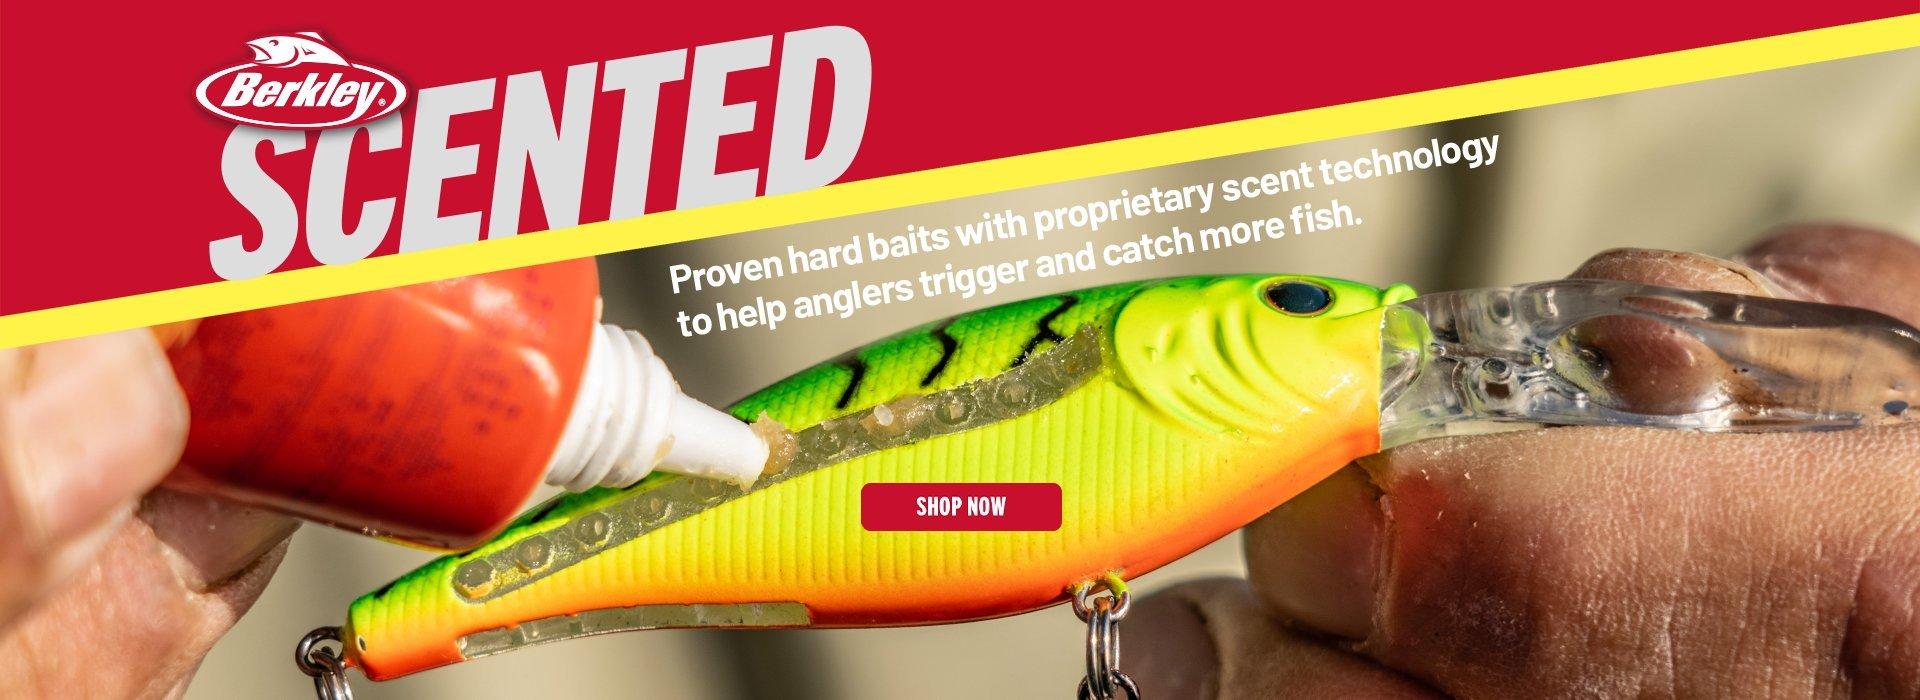 Berkley Scented Flicker: Berkley Scented Flicker: Proven hard baits with proprietary scent technology to help anglers trigger and catch more fish. Shop Now.